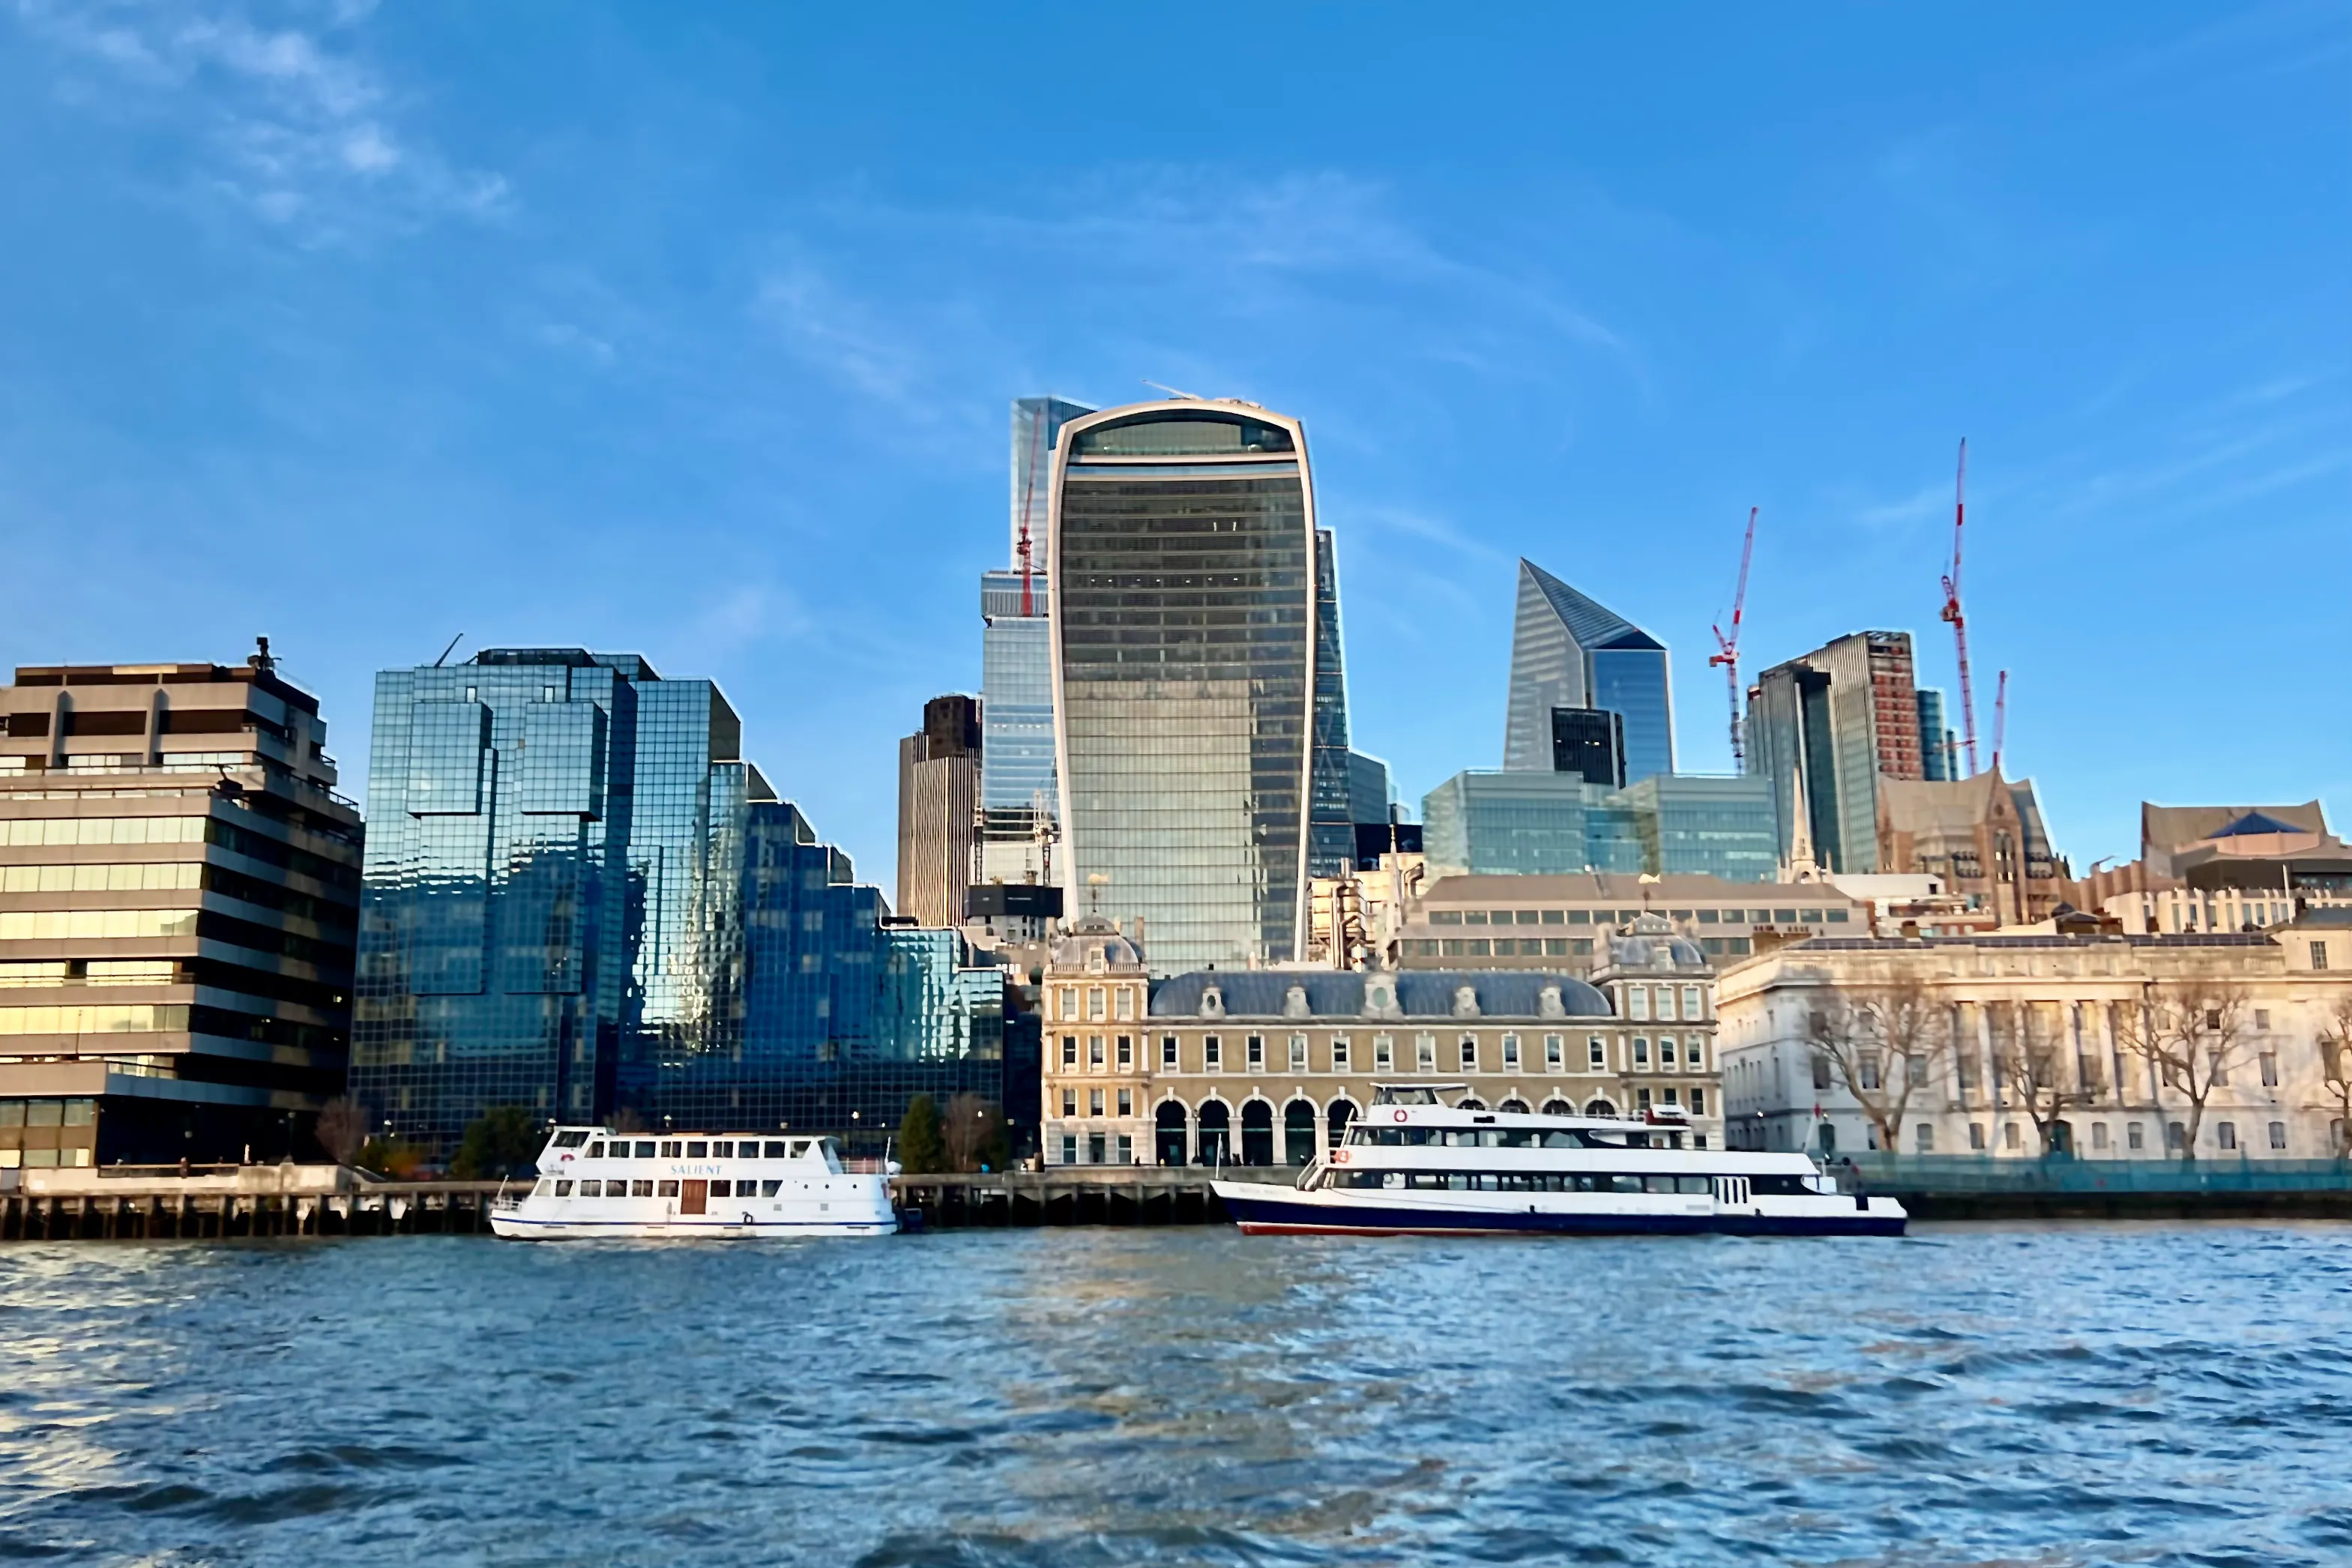 A view of the City of London from a river boat